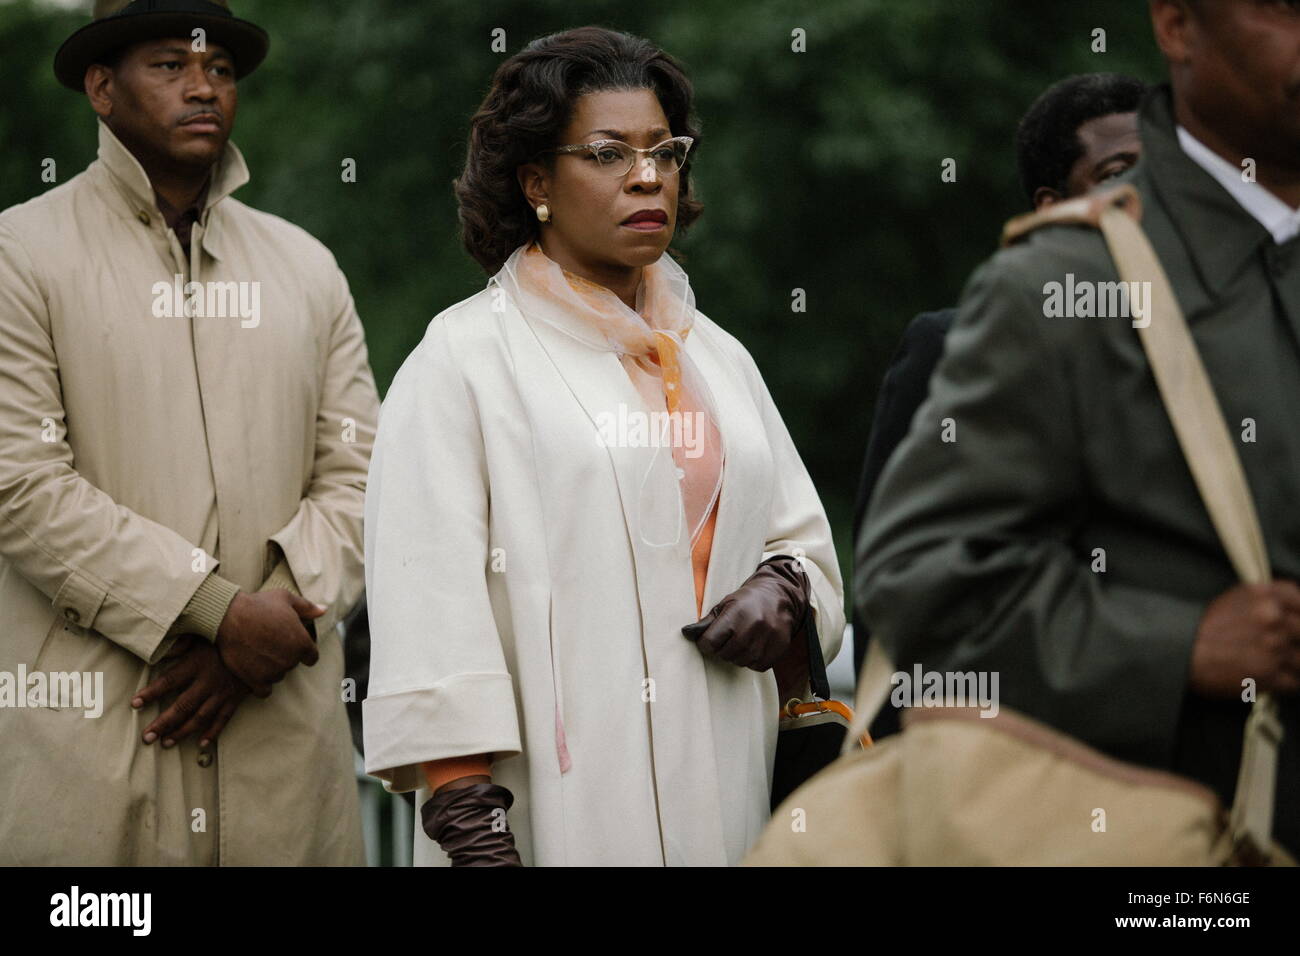 RELEASE DATE: January 9, 2015 TITLE: Selma STUDIO: Paramount Pictures DIRECTOR: Ava DuVernay PLOT: Martin Luther King and the civil rights marches of Selma, Alabama, that changed the United States for ever. PICTURED: LORRAINE TOUSSAINT as Amelia Boynton Stock Photo